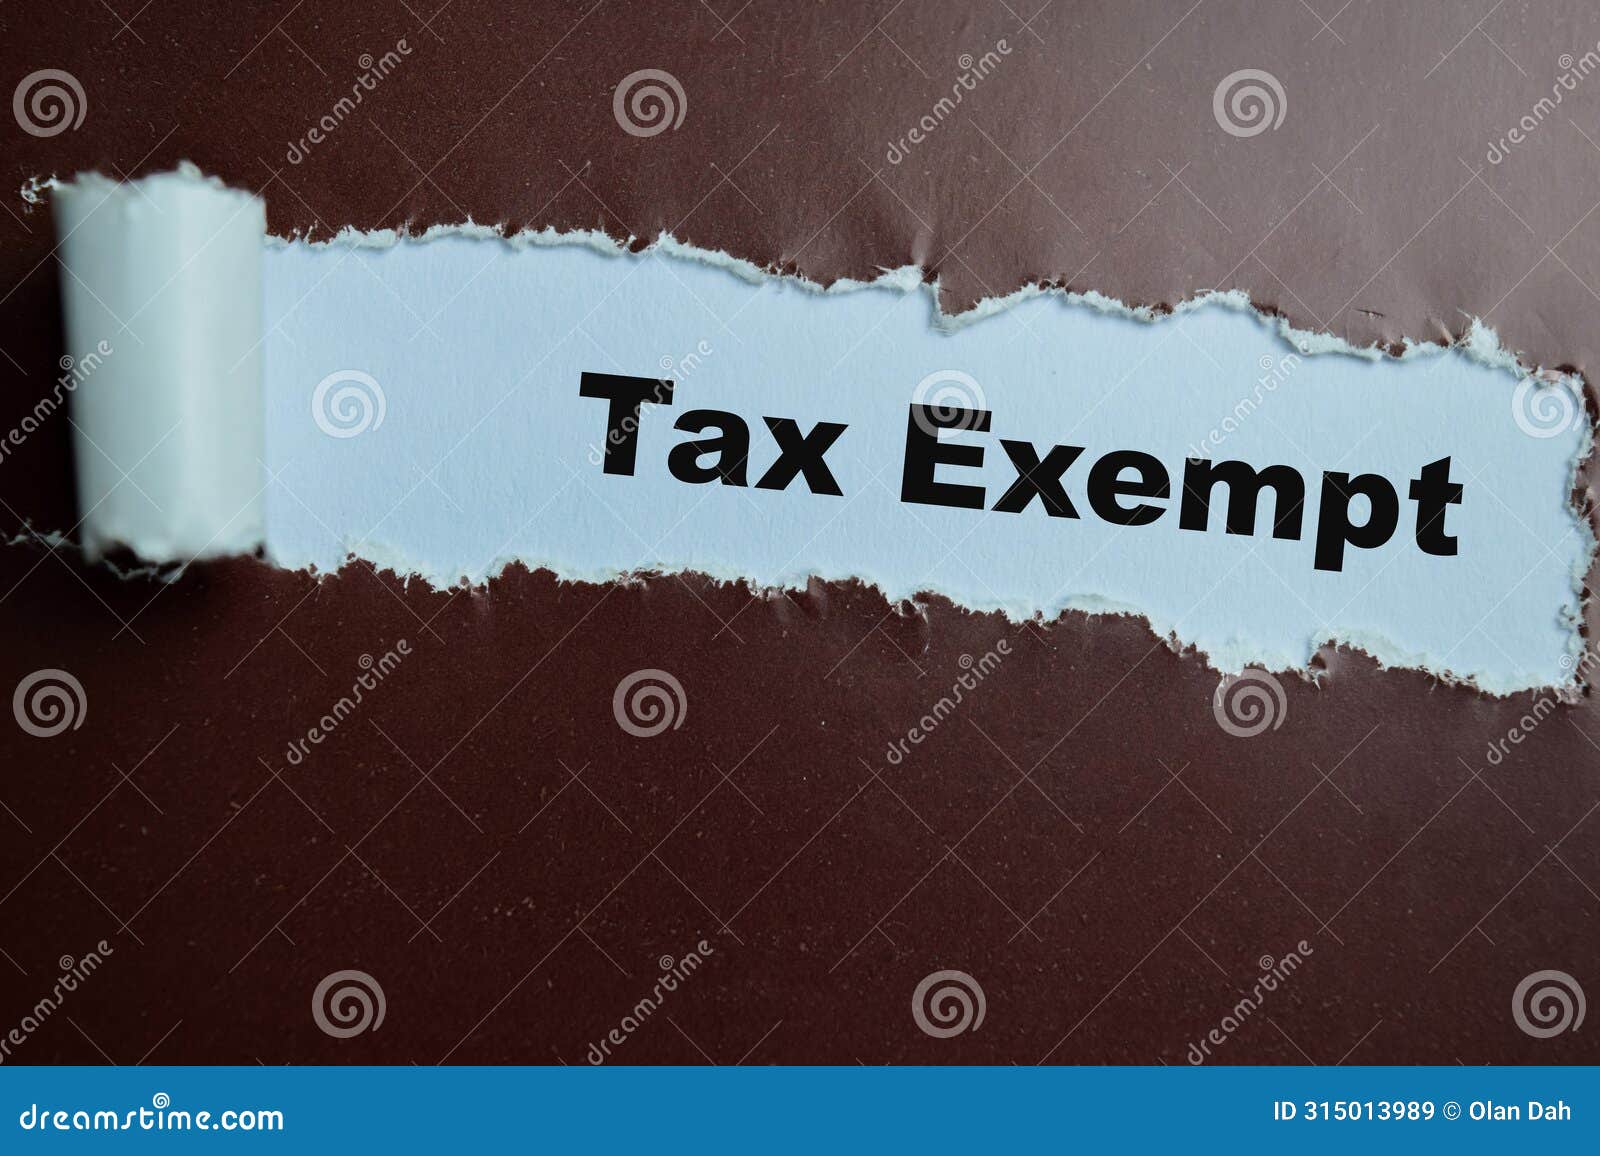 concept of tax exempt text written in torn paper